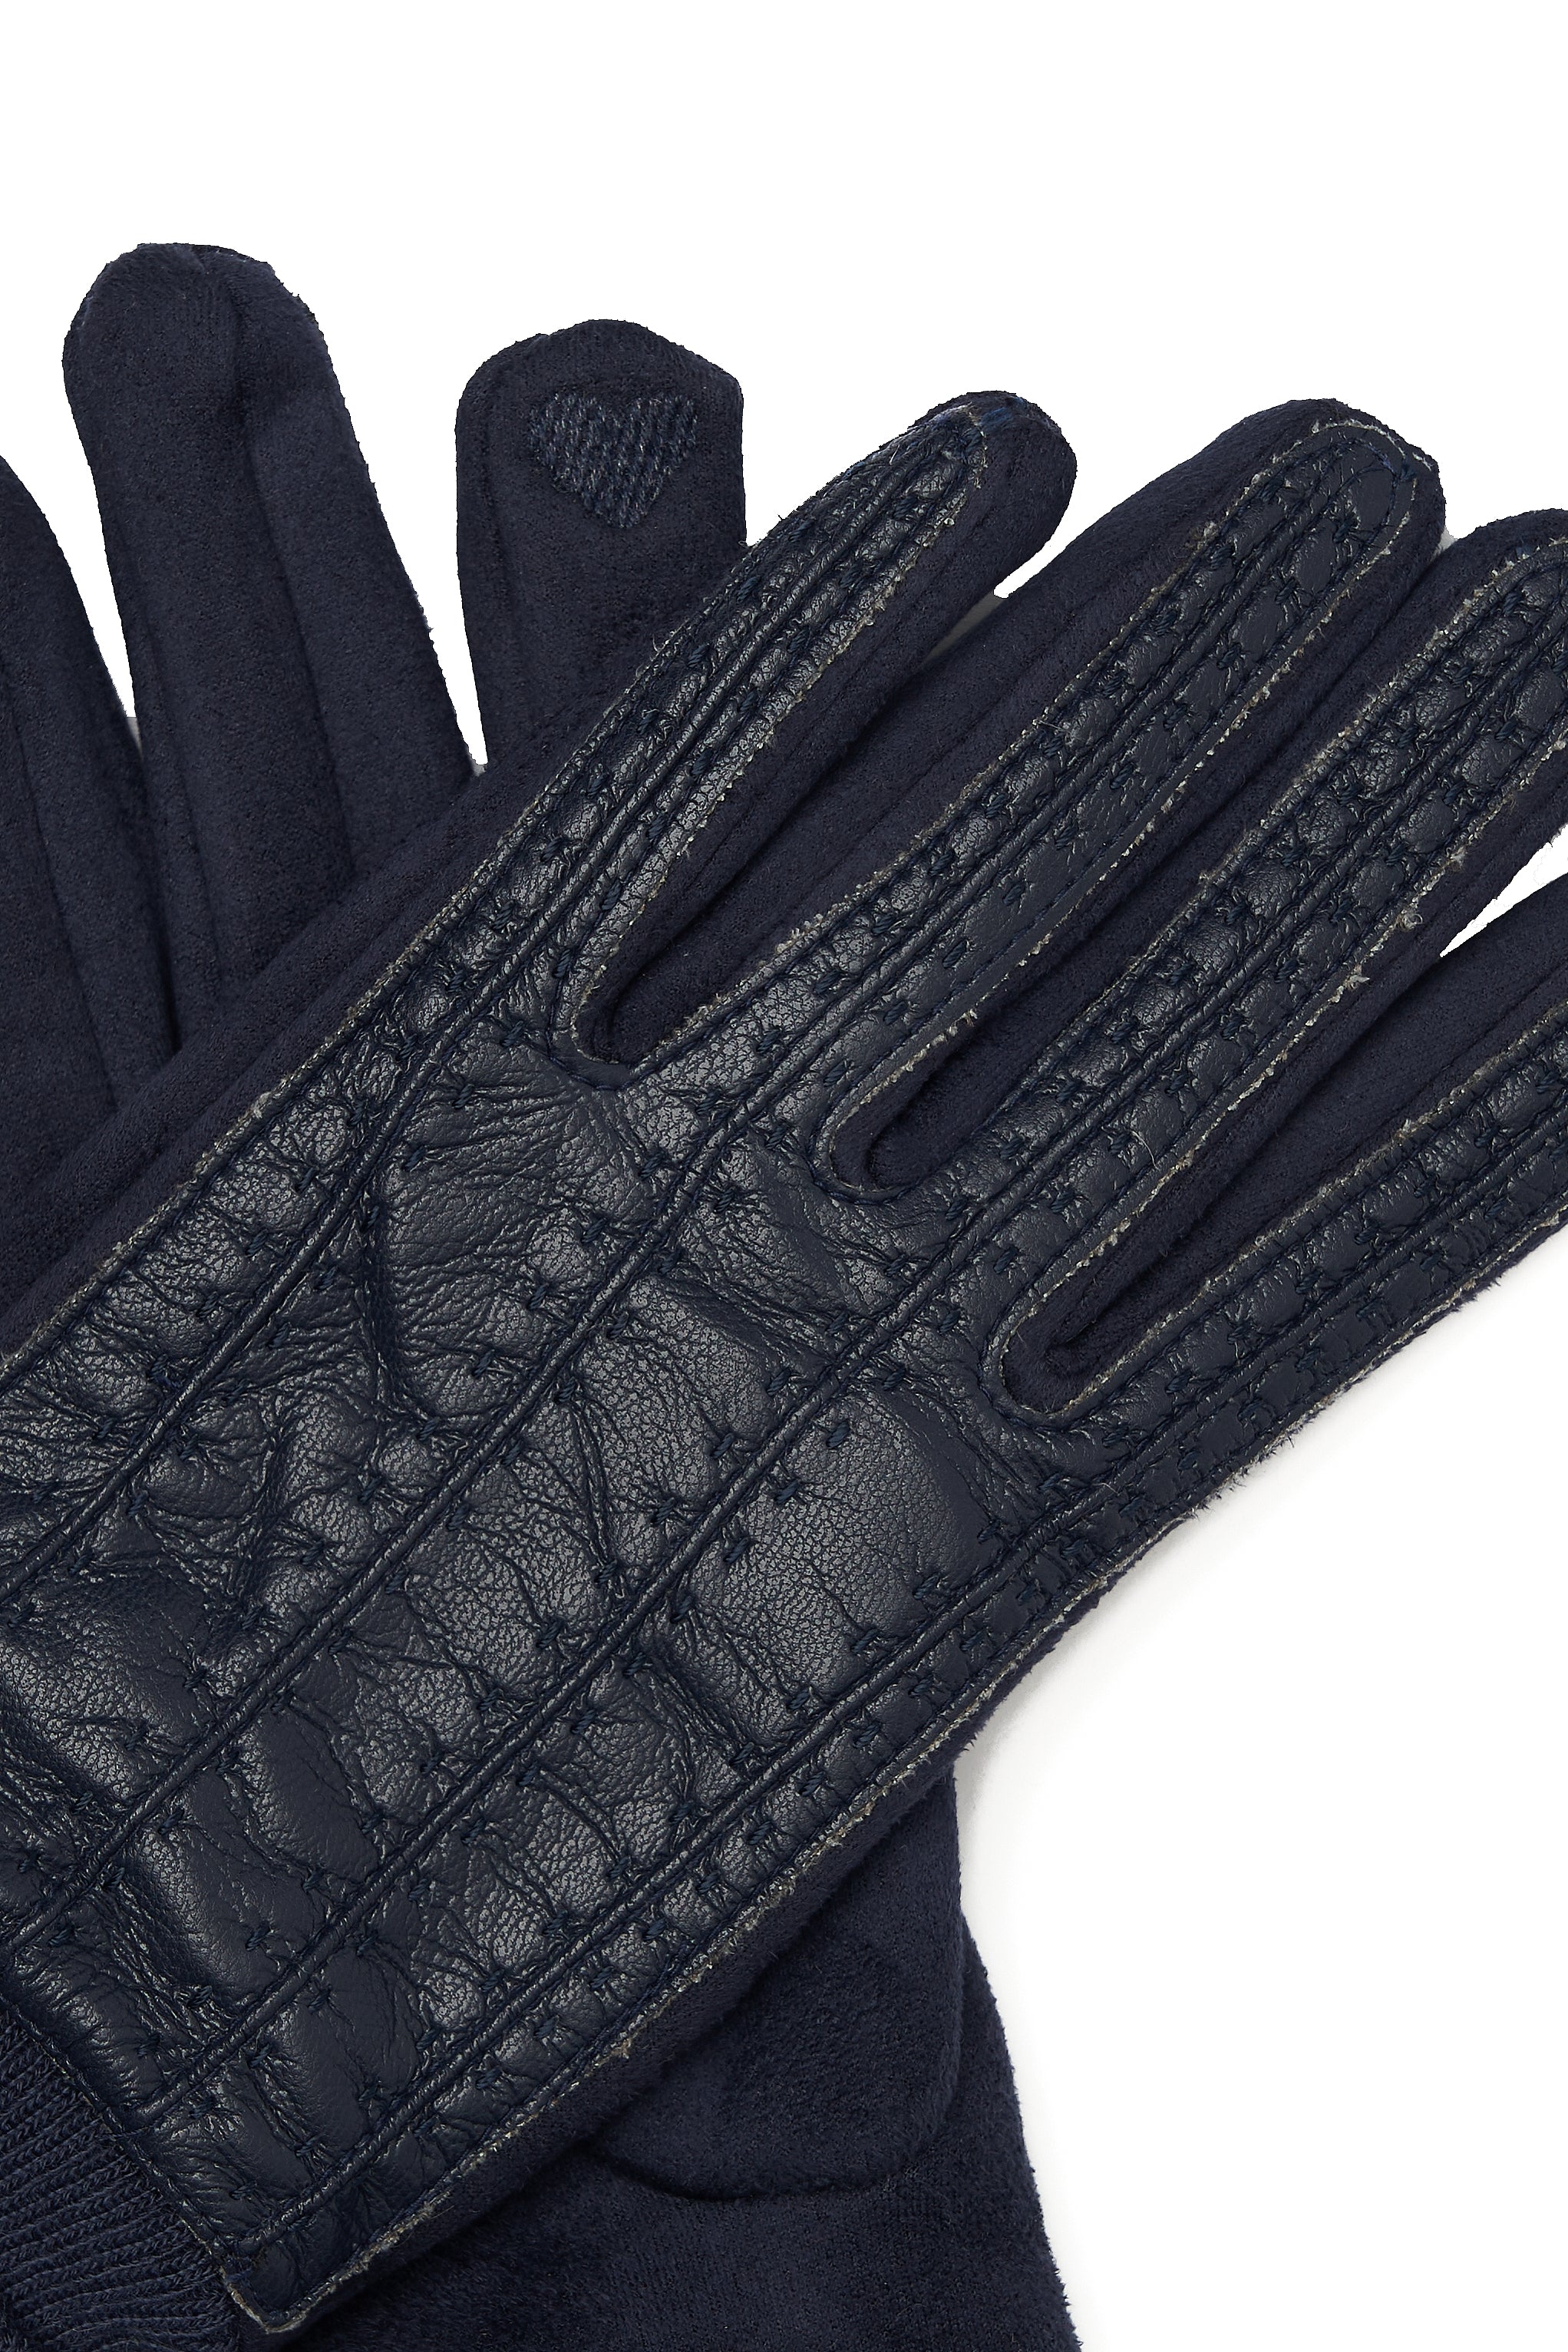 ECO LEATHER BLUE GLOVES